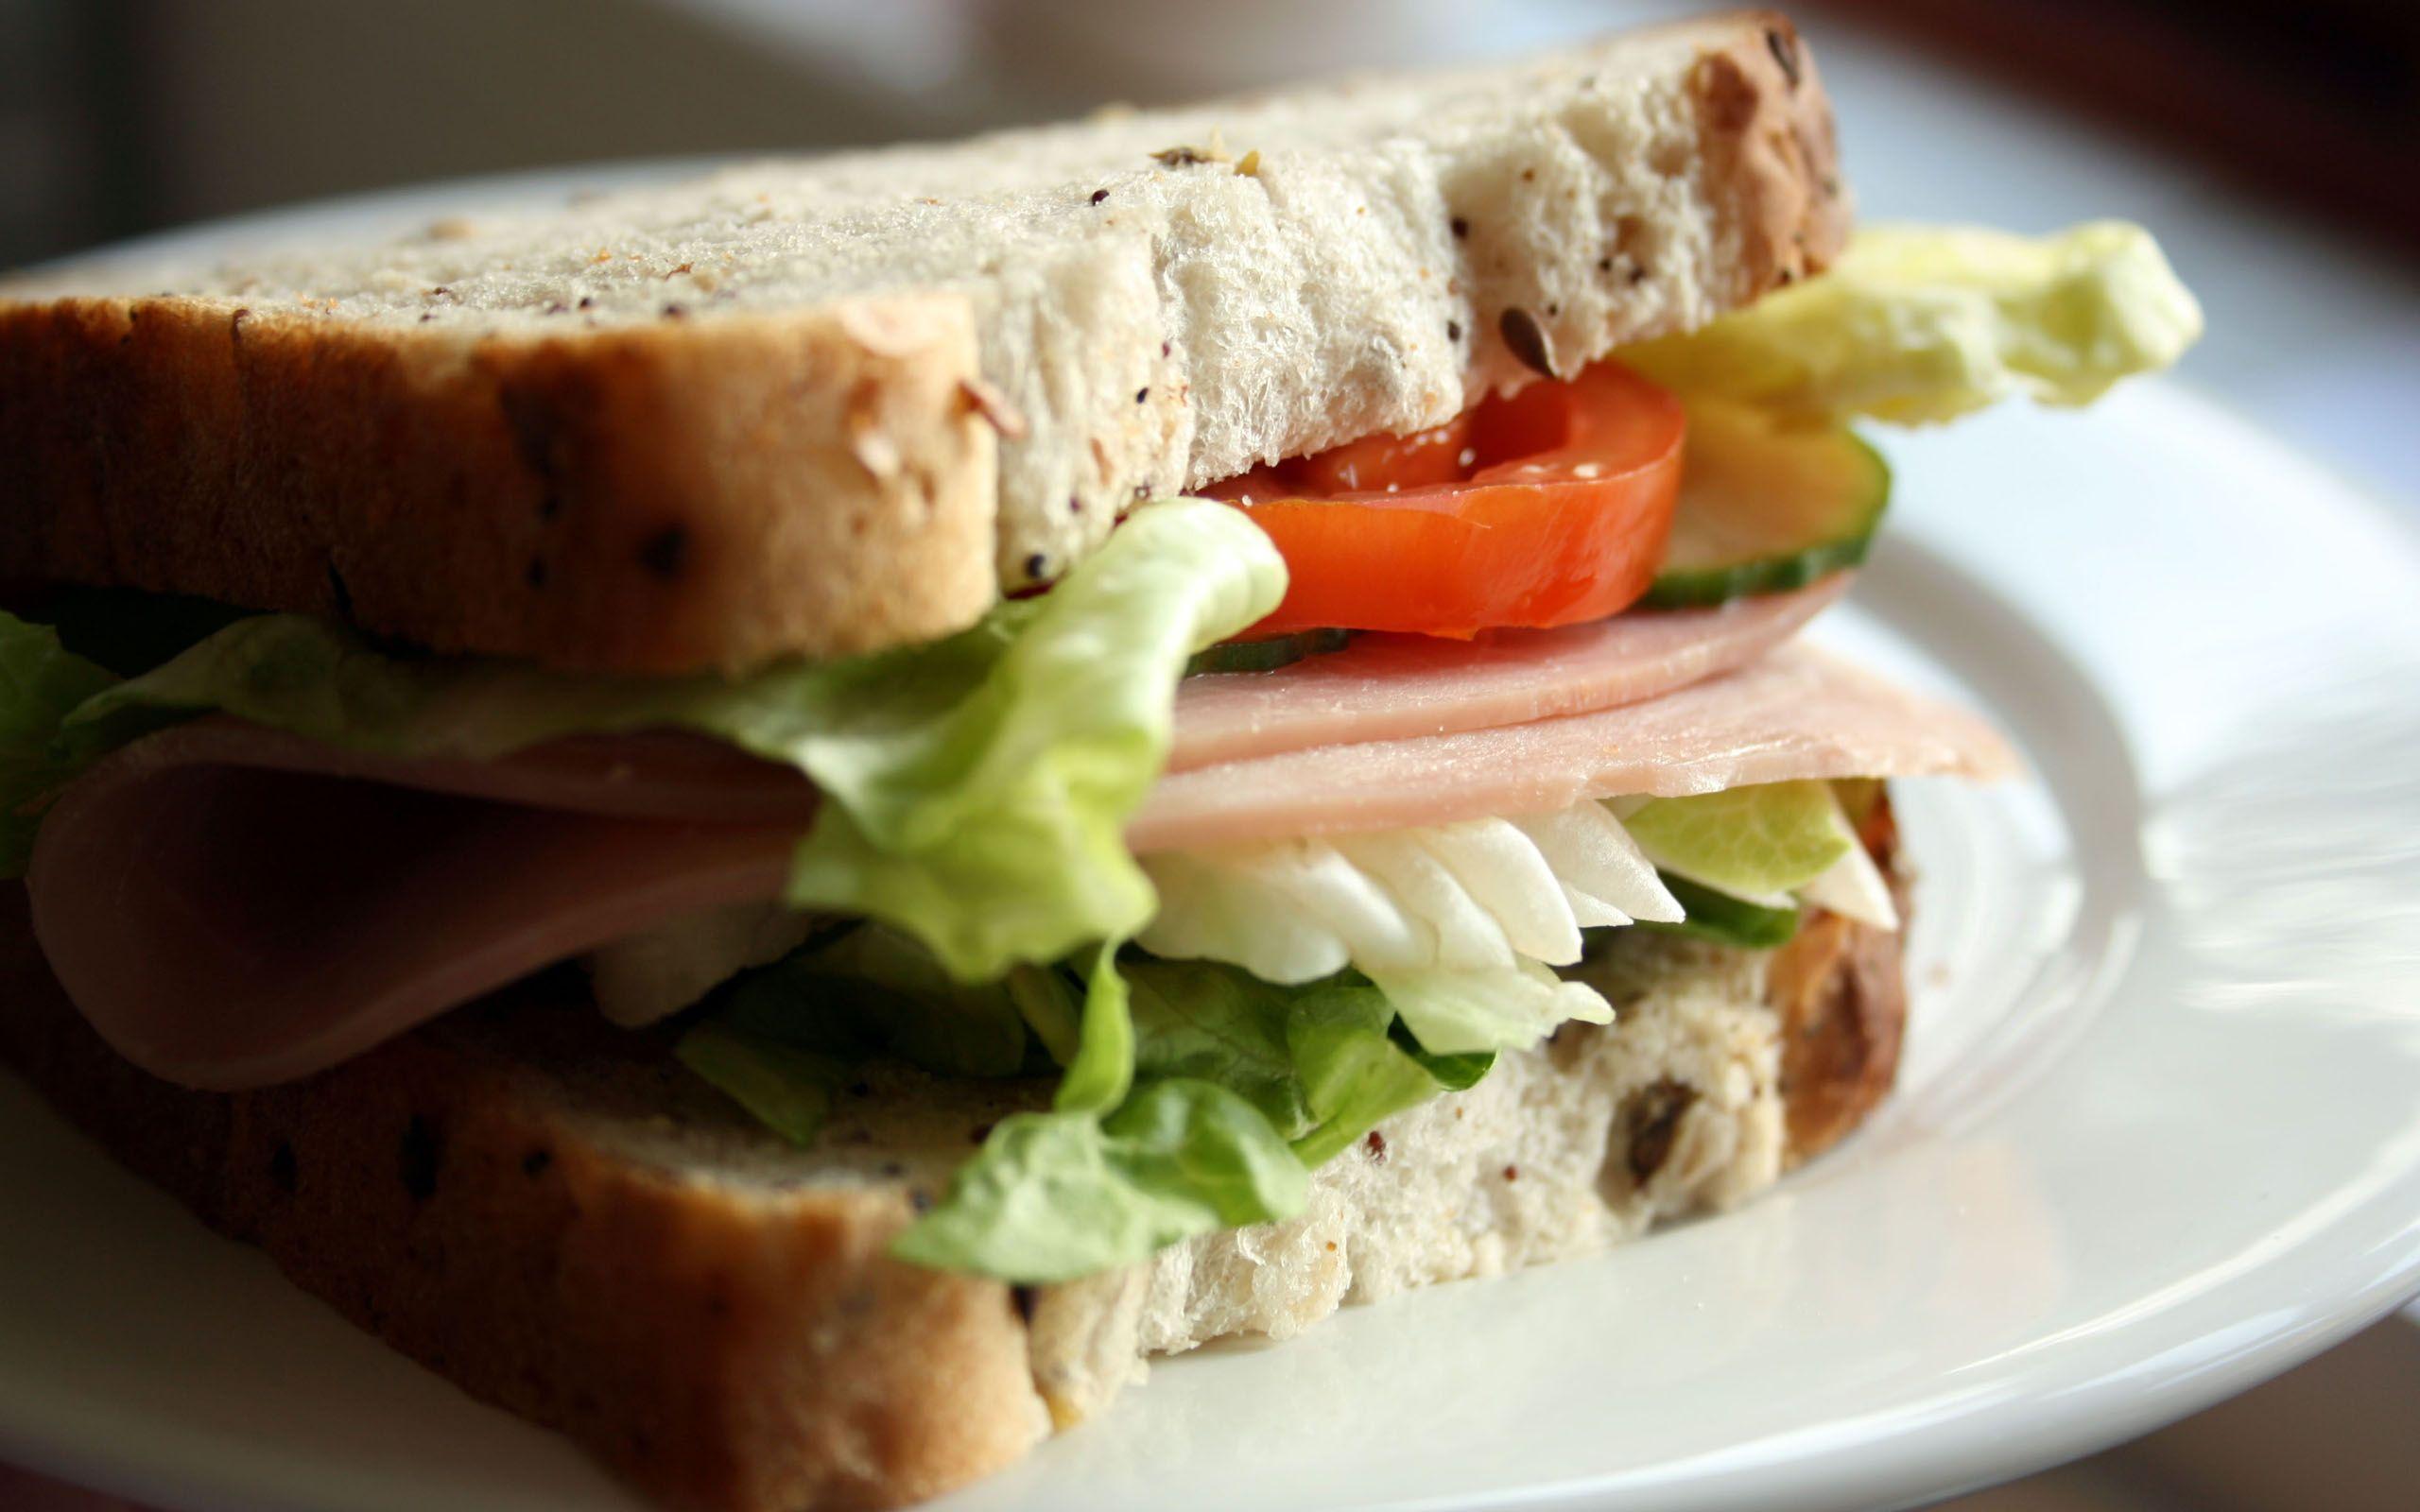 Sandwich wallpaper and image, picture, photo